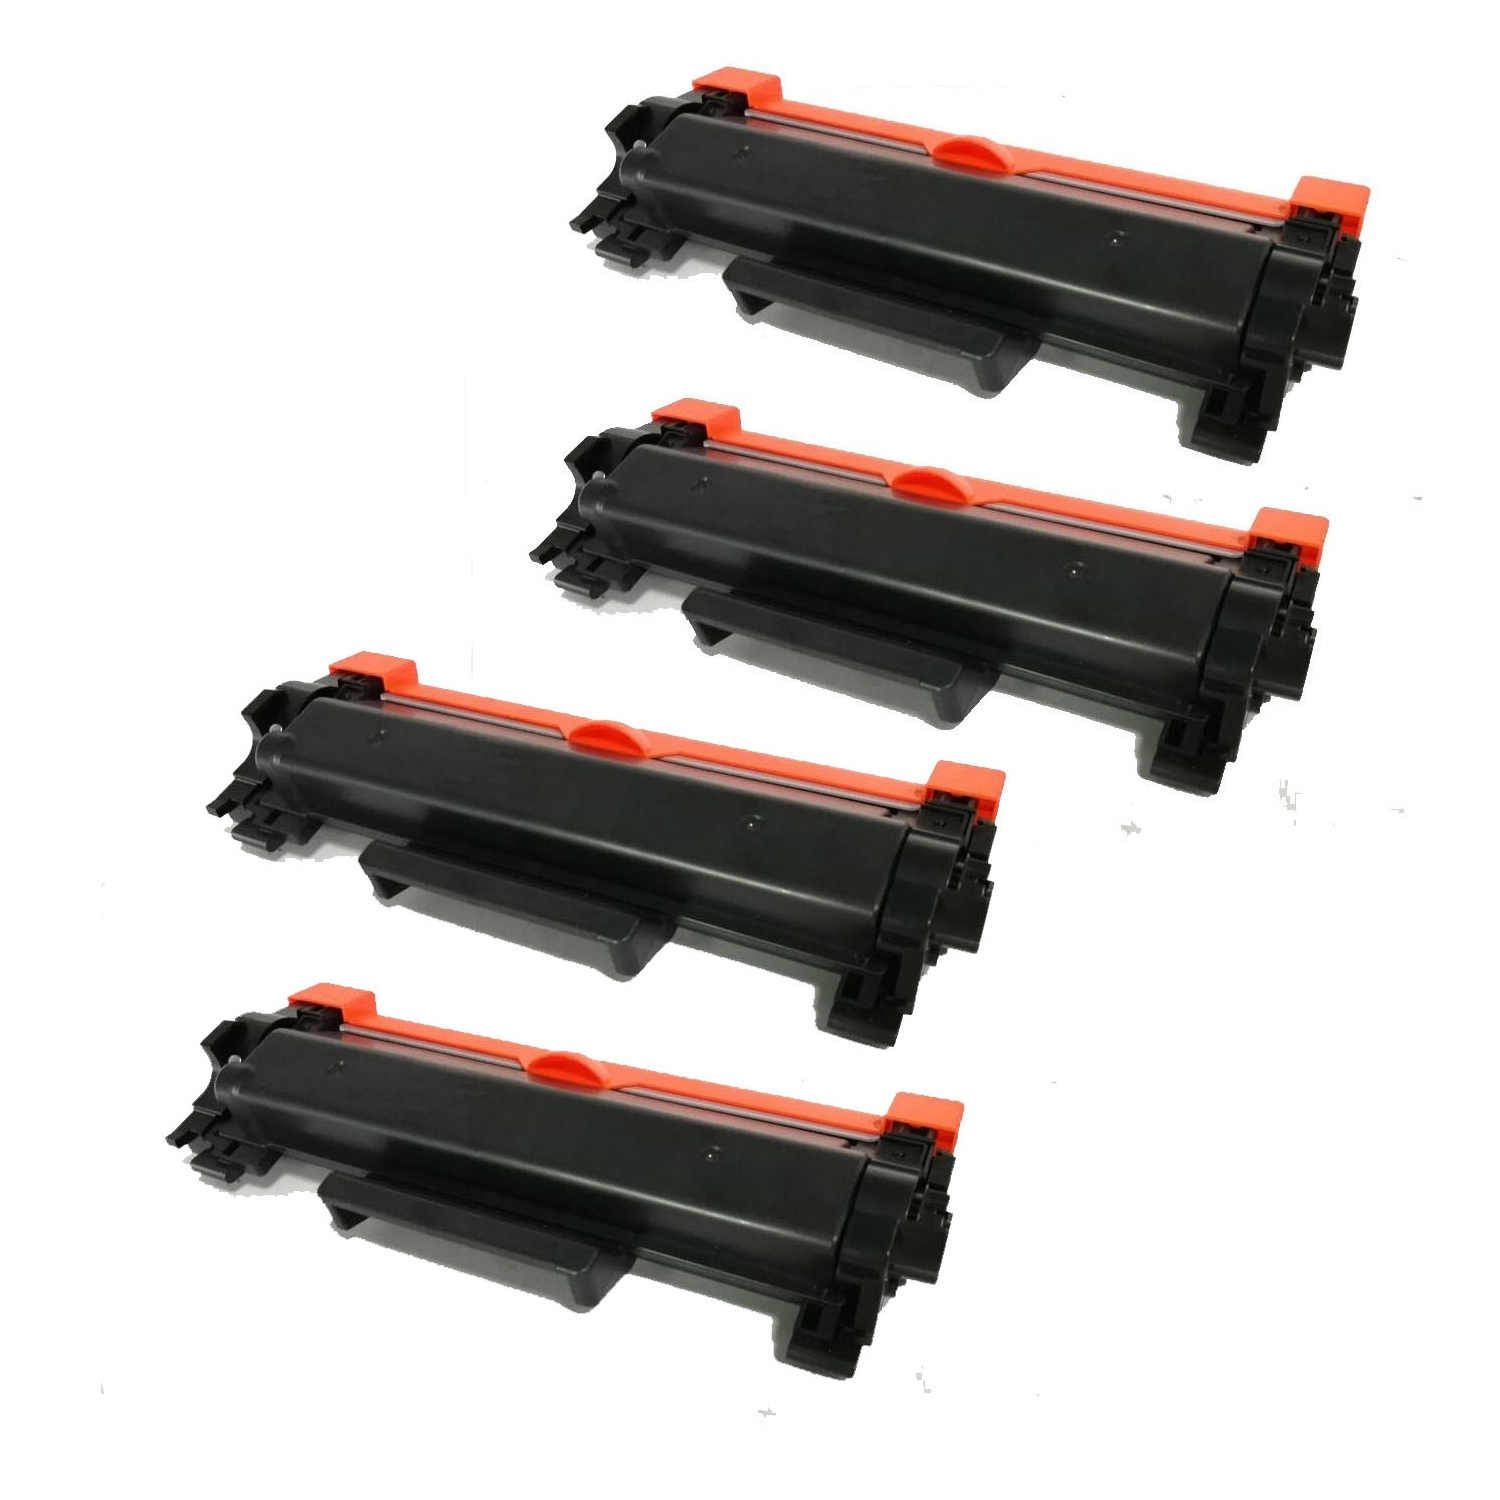 Max Saving - 4Pack High Yield Toner with Chip Replacement for Brother TN760,TN-760,TN730,TN-730 DCP-L2550,HL-L2350,HL-L2370,MFC-L2710,MFC-L2730,MFC-L2750,MFC-L2750